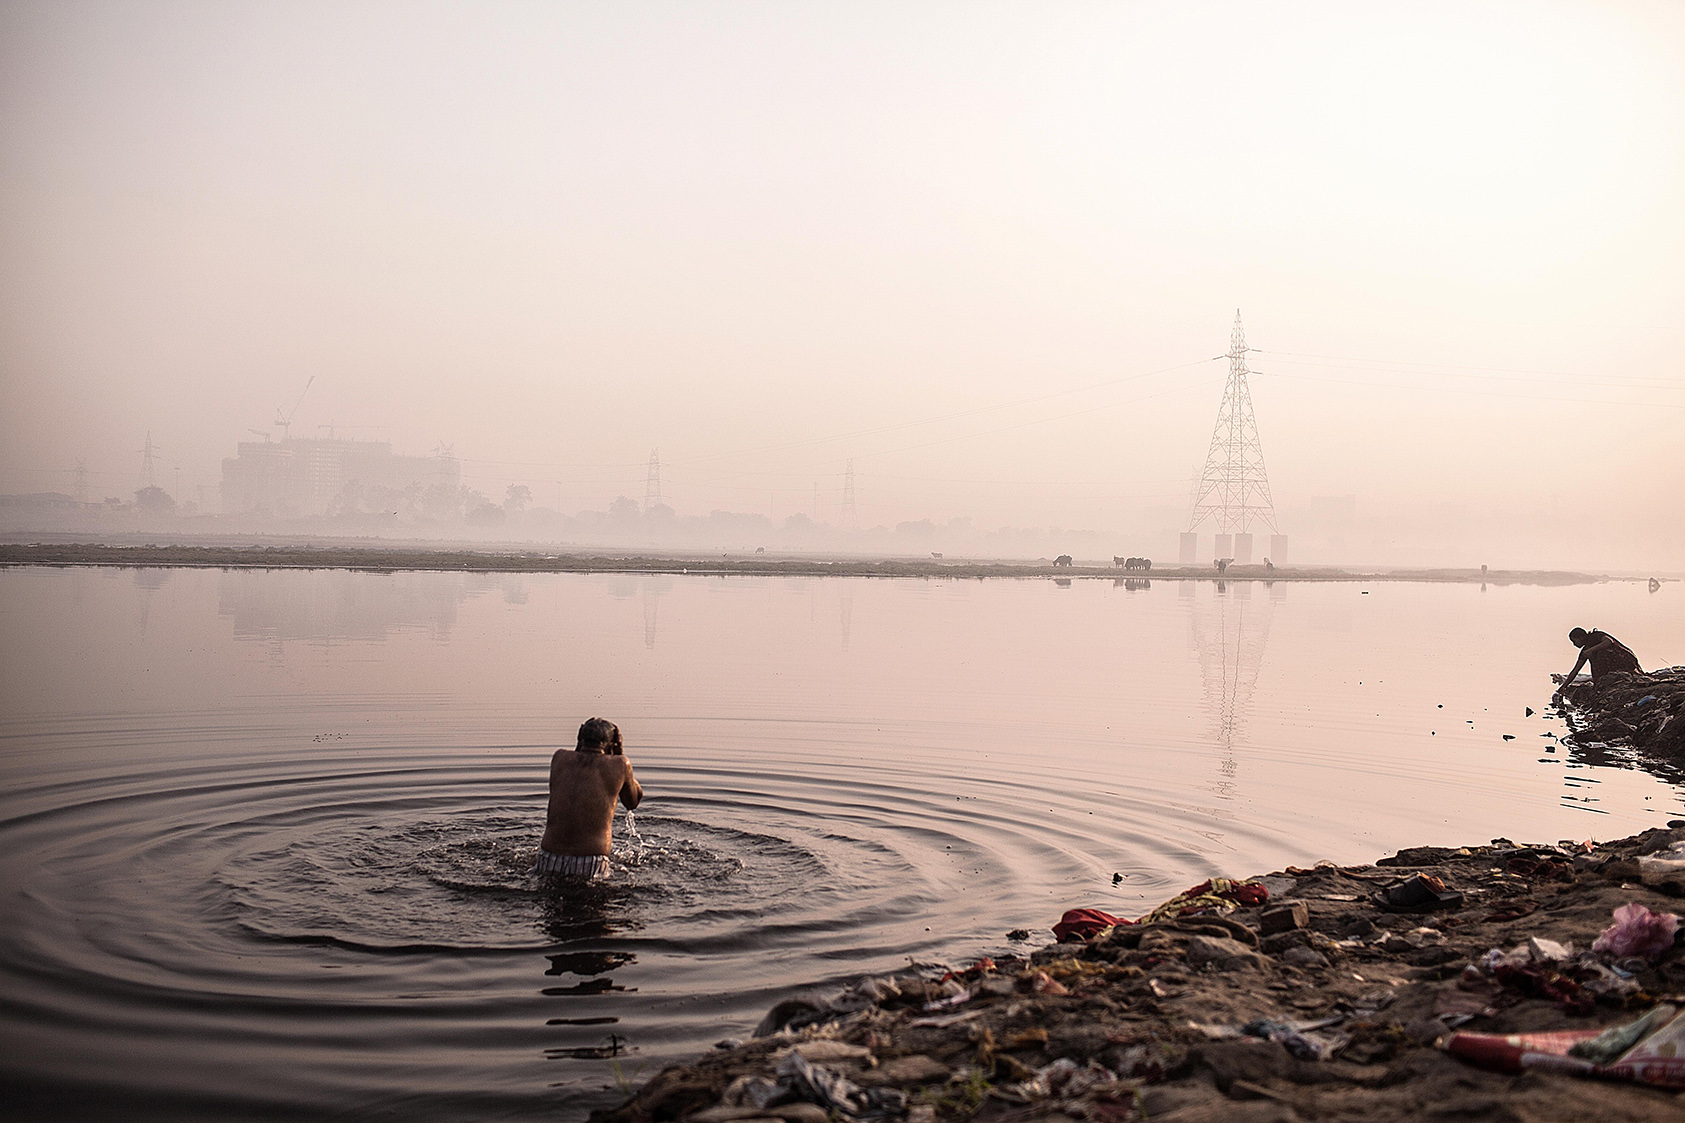 A Hindu devotee offers prayers after a dip in the Yamuna River